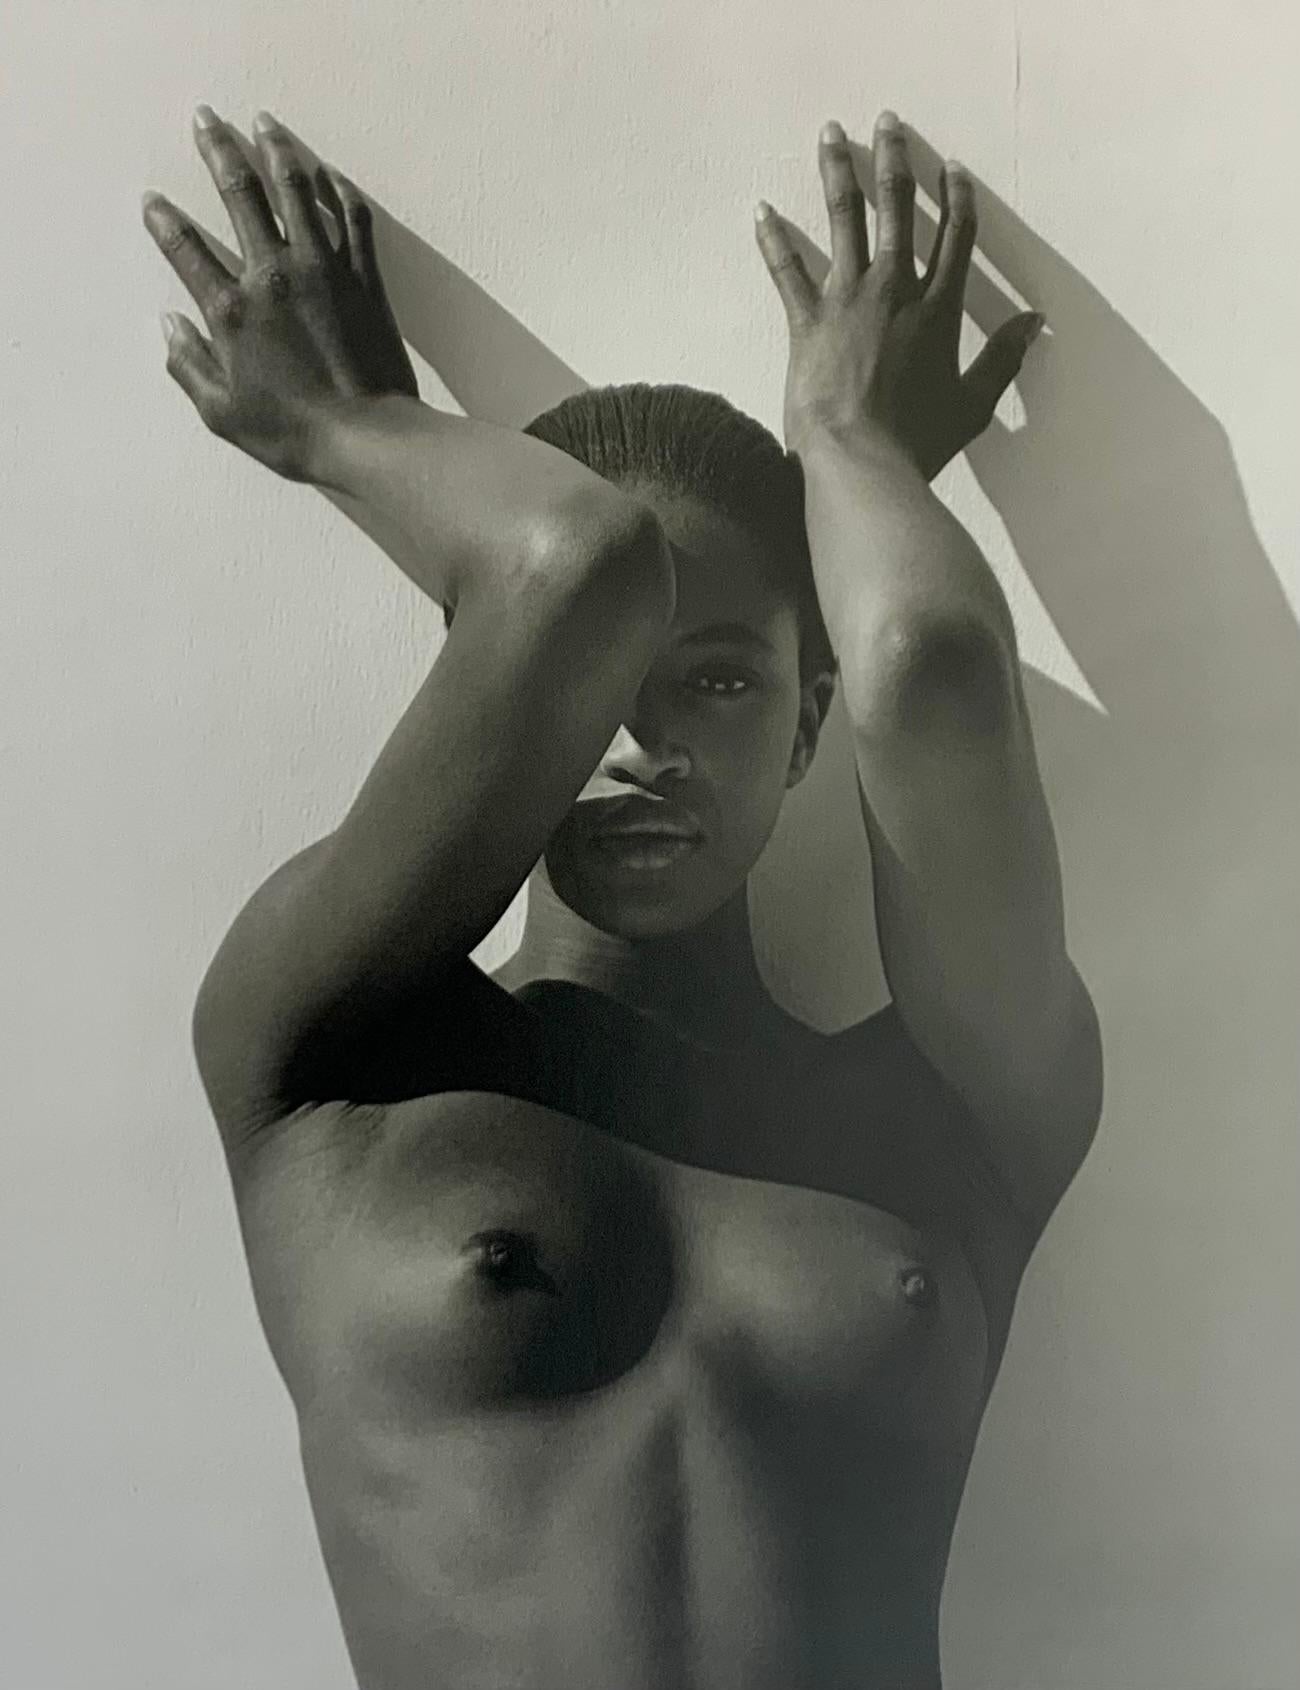 Naomi with Raised Arms Los Angeles by Herb Ritts Vintage print